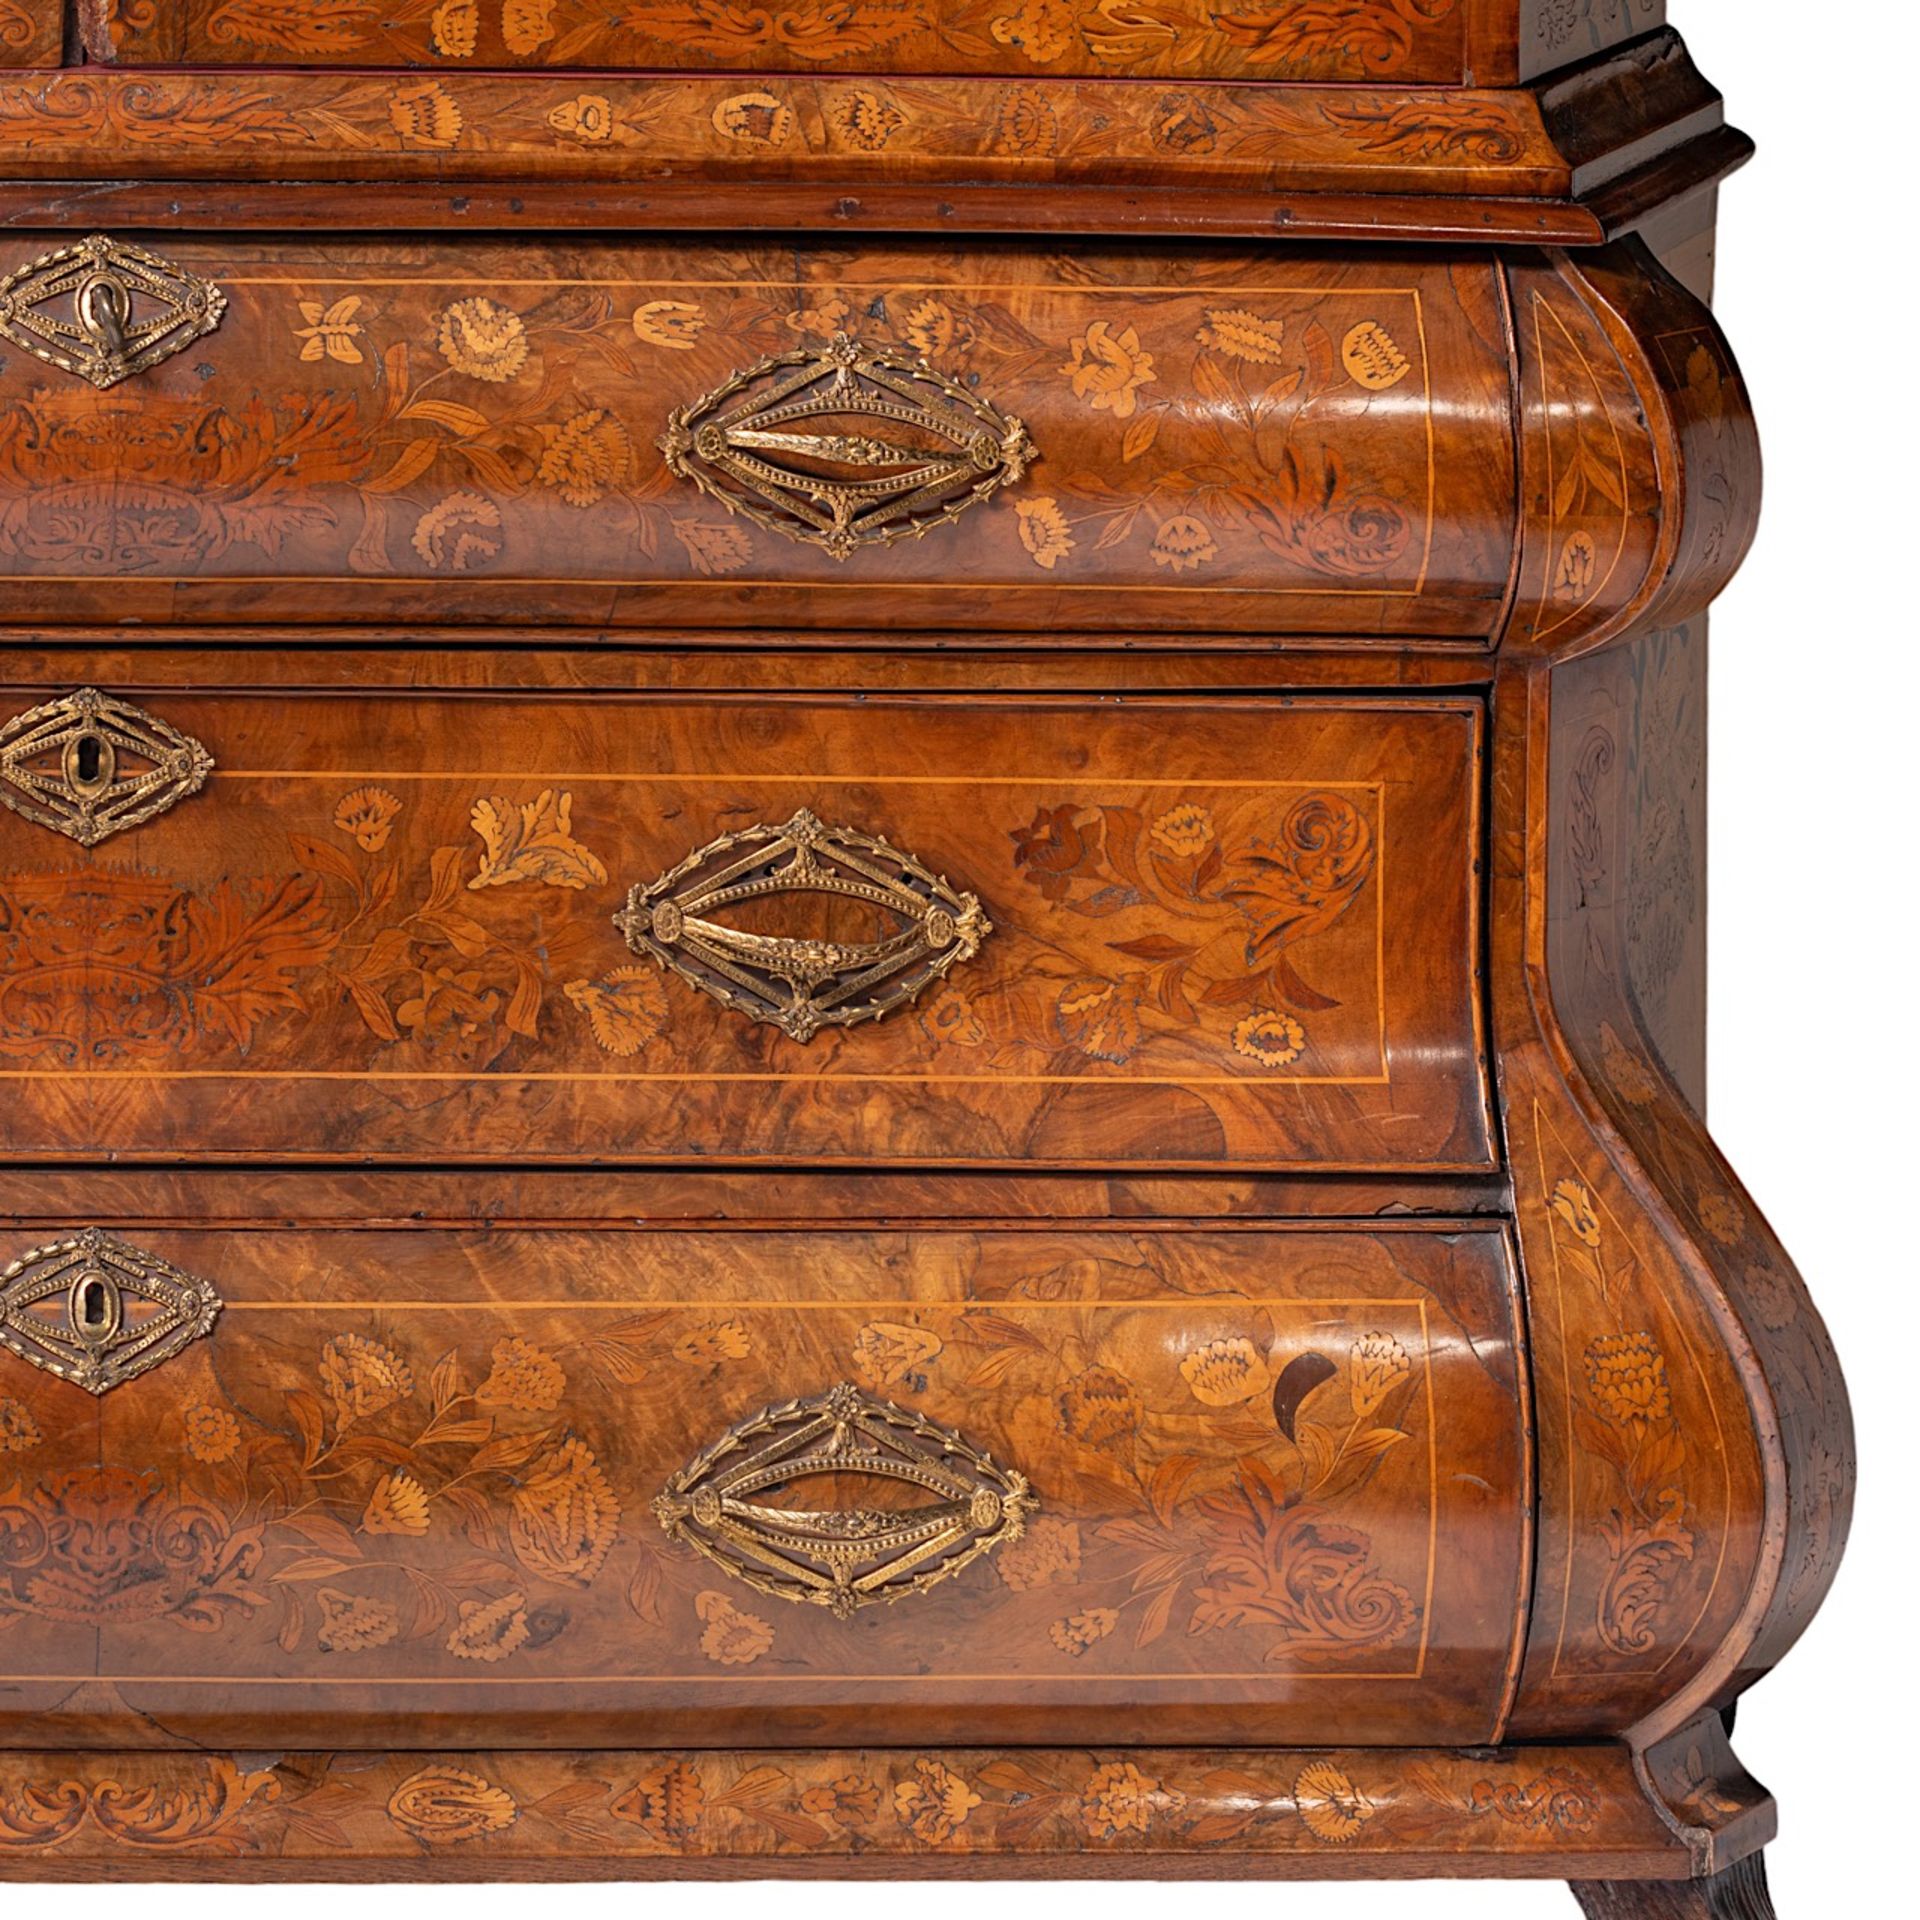 A Dutch Neoclassical marquetry display cabinet, 18thC, H 220 - W 145 - D 43 cm - Image 8 of 11